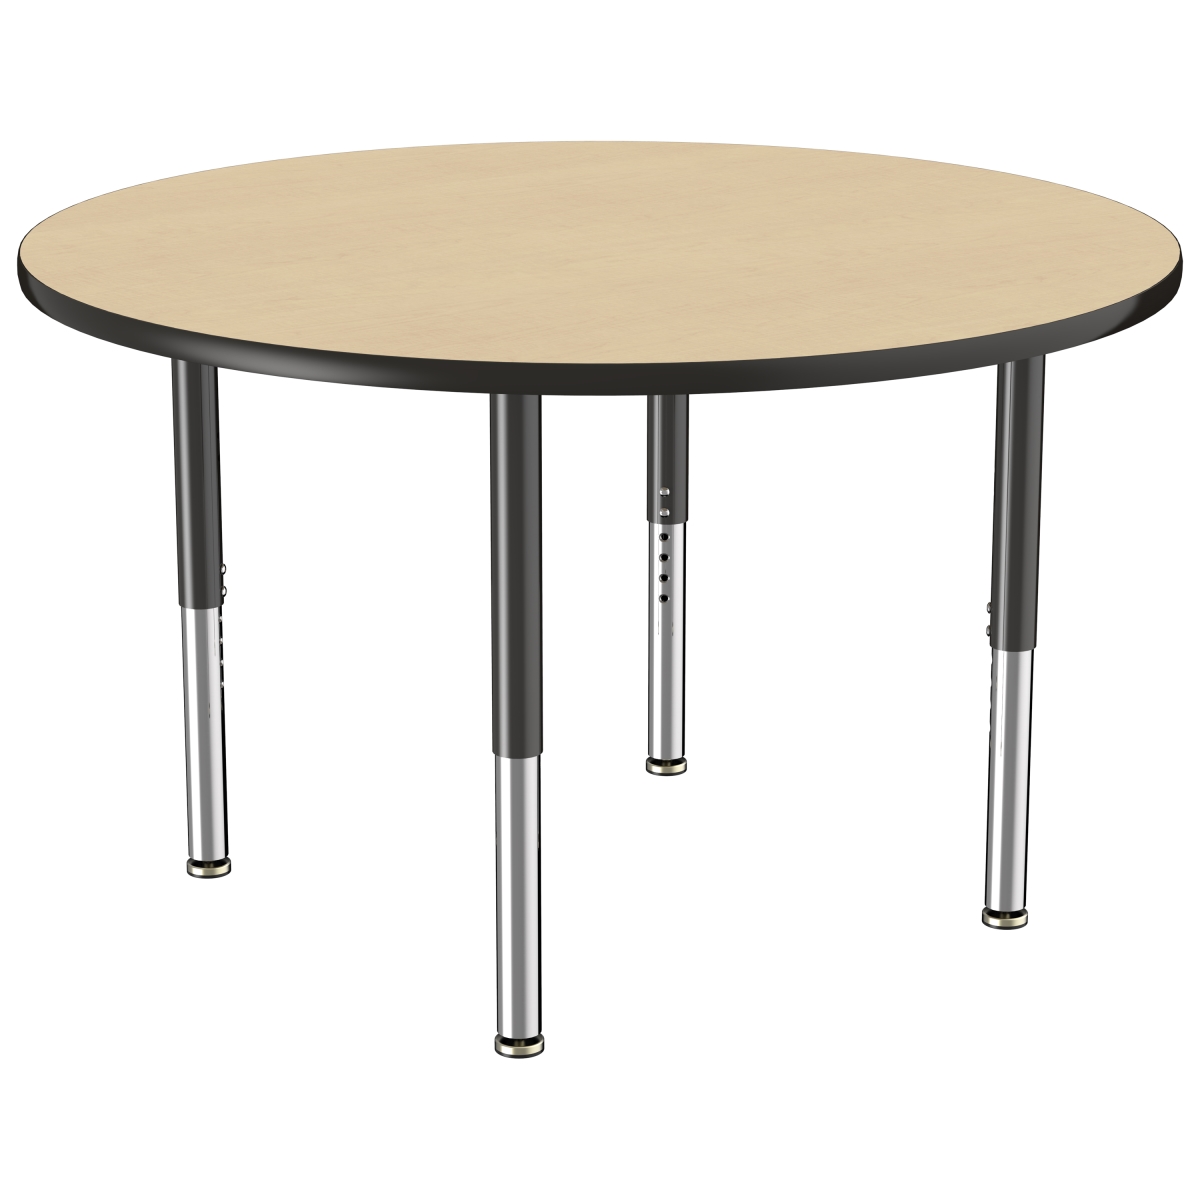 10046-mpbk 48 In. Round T-mold Adjustable Activity Table With Super Leg - Maple & Black